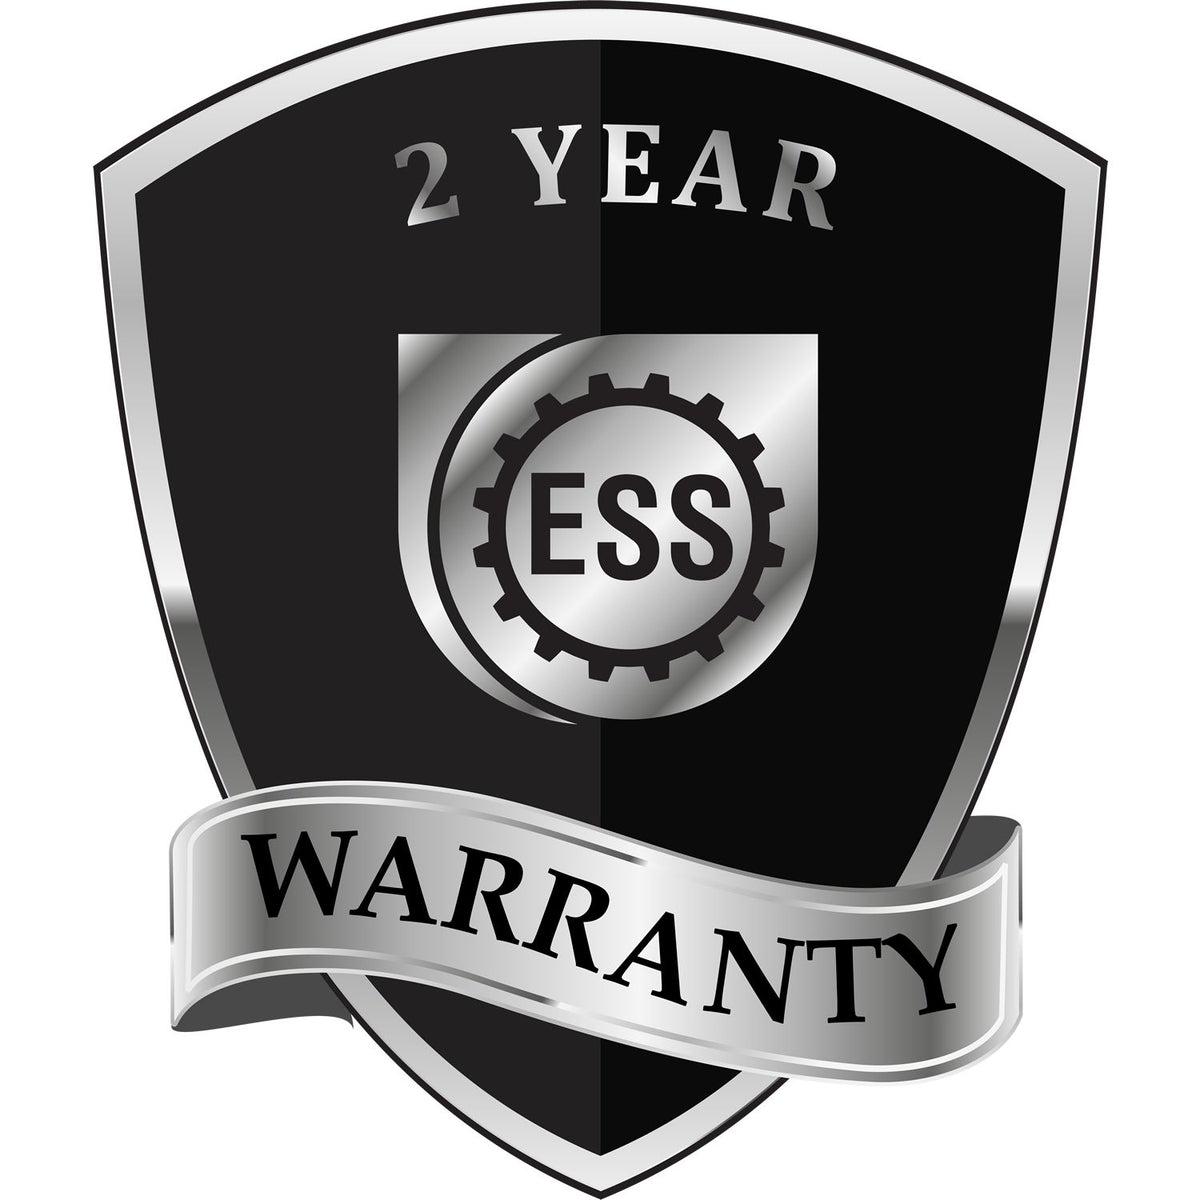 A badge or emblem showing a warranty icon for the California Engineer Desk Seal